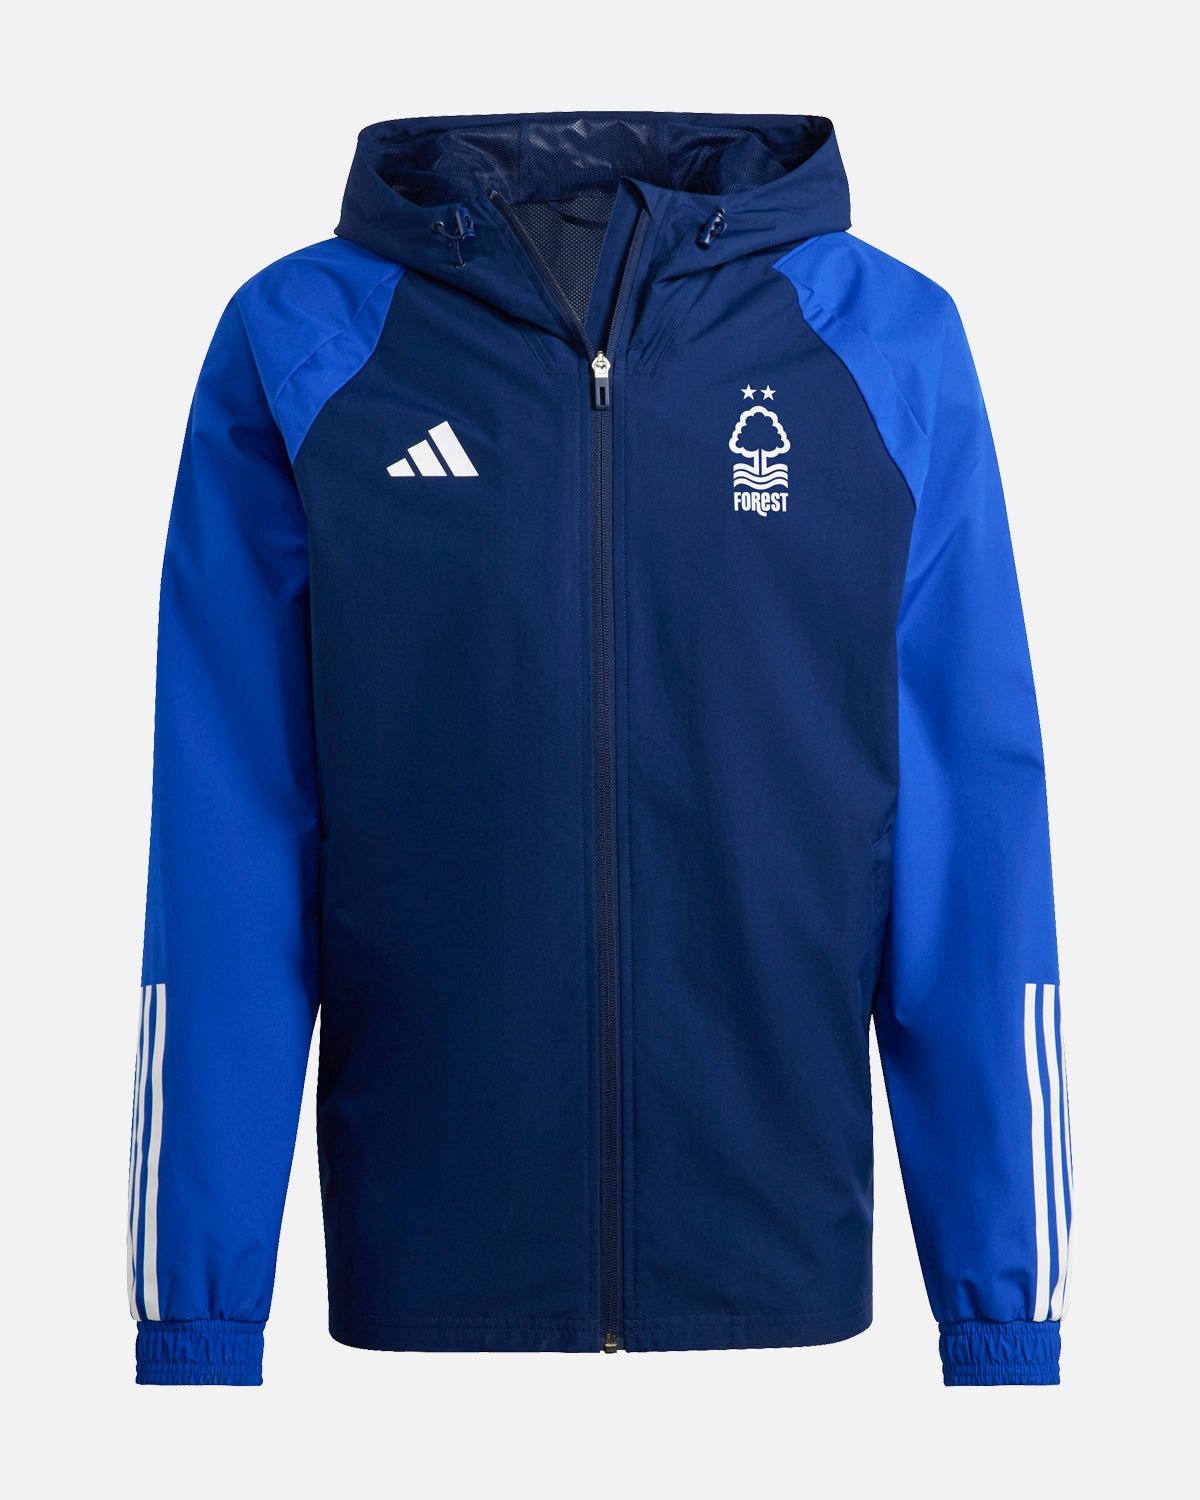 NFFC Junior Navy All Weather Training Jacket 23-24 - Nottingham Forest FC